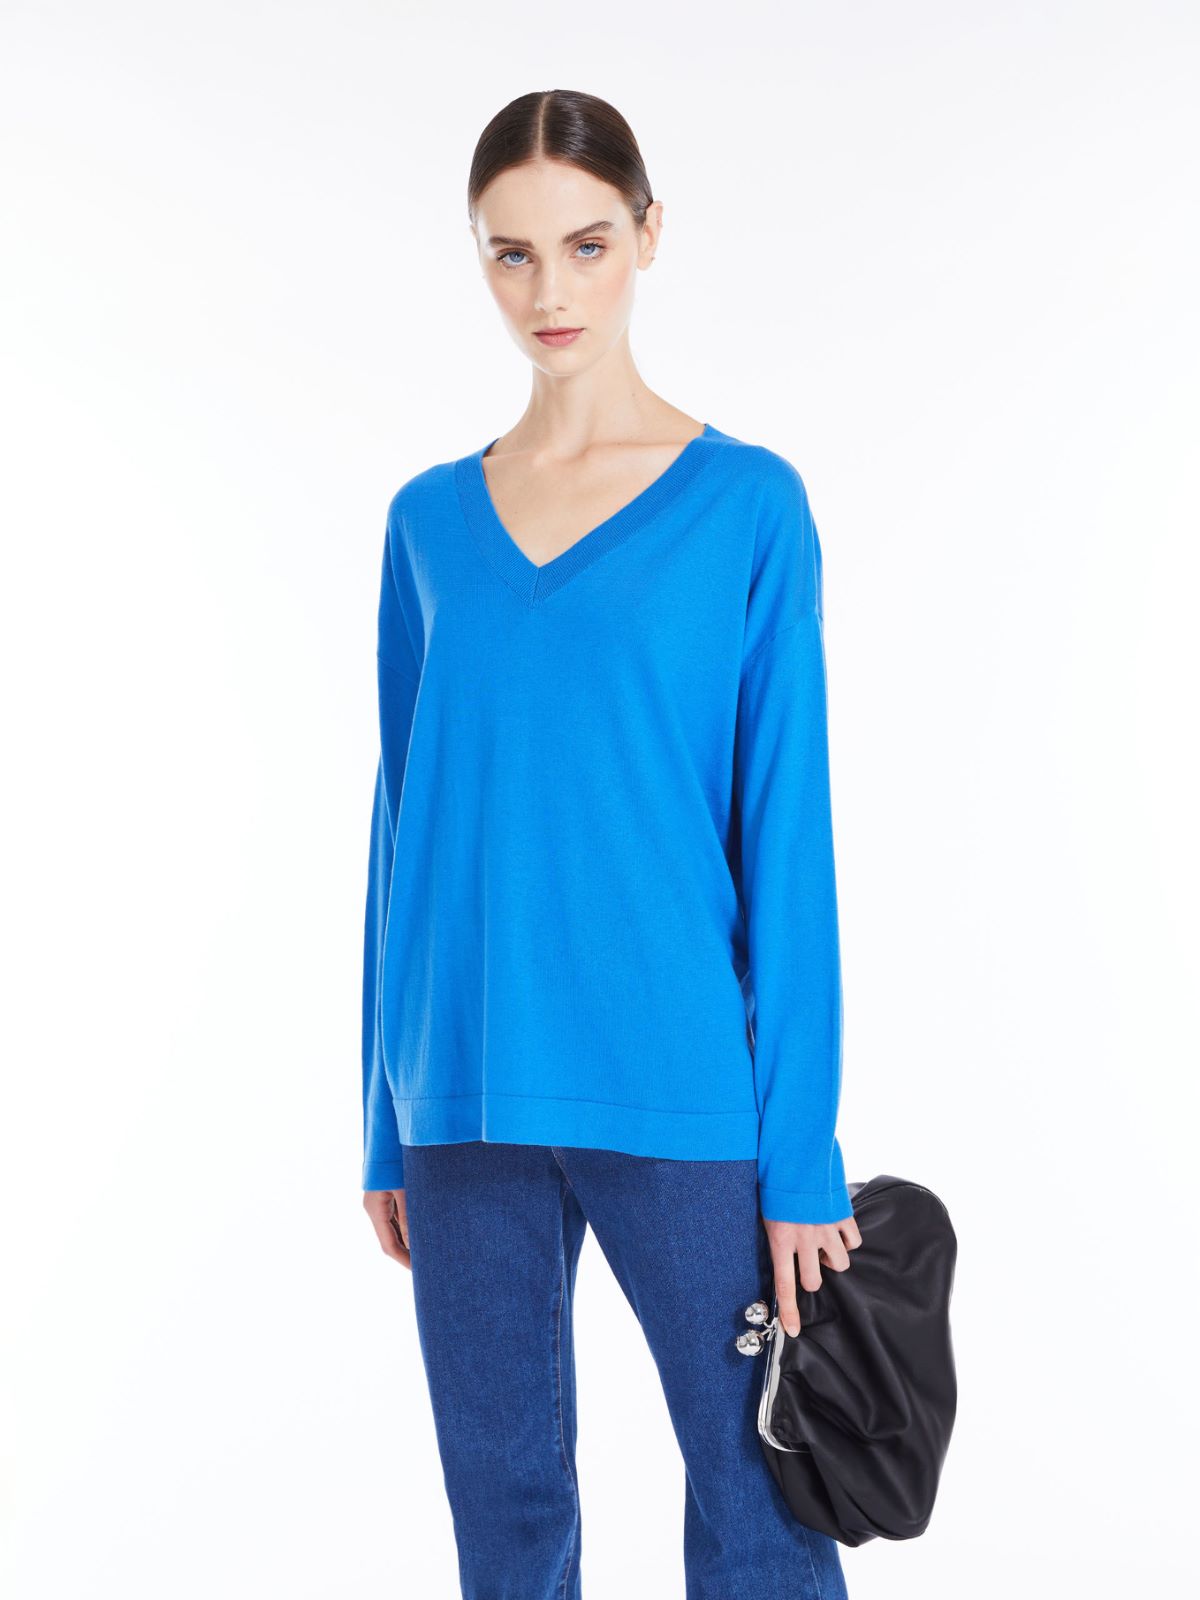 Oversized knit top in silk and cotton - CHINA BLUE - Weekend Max Mara - 4